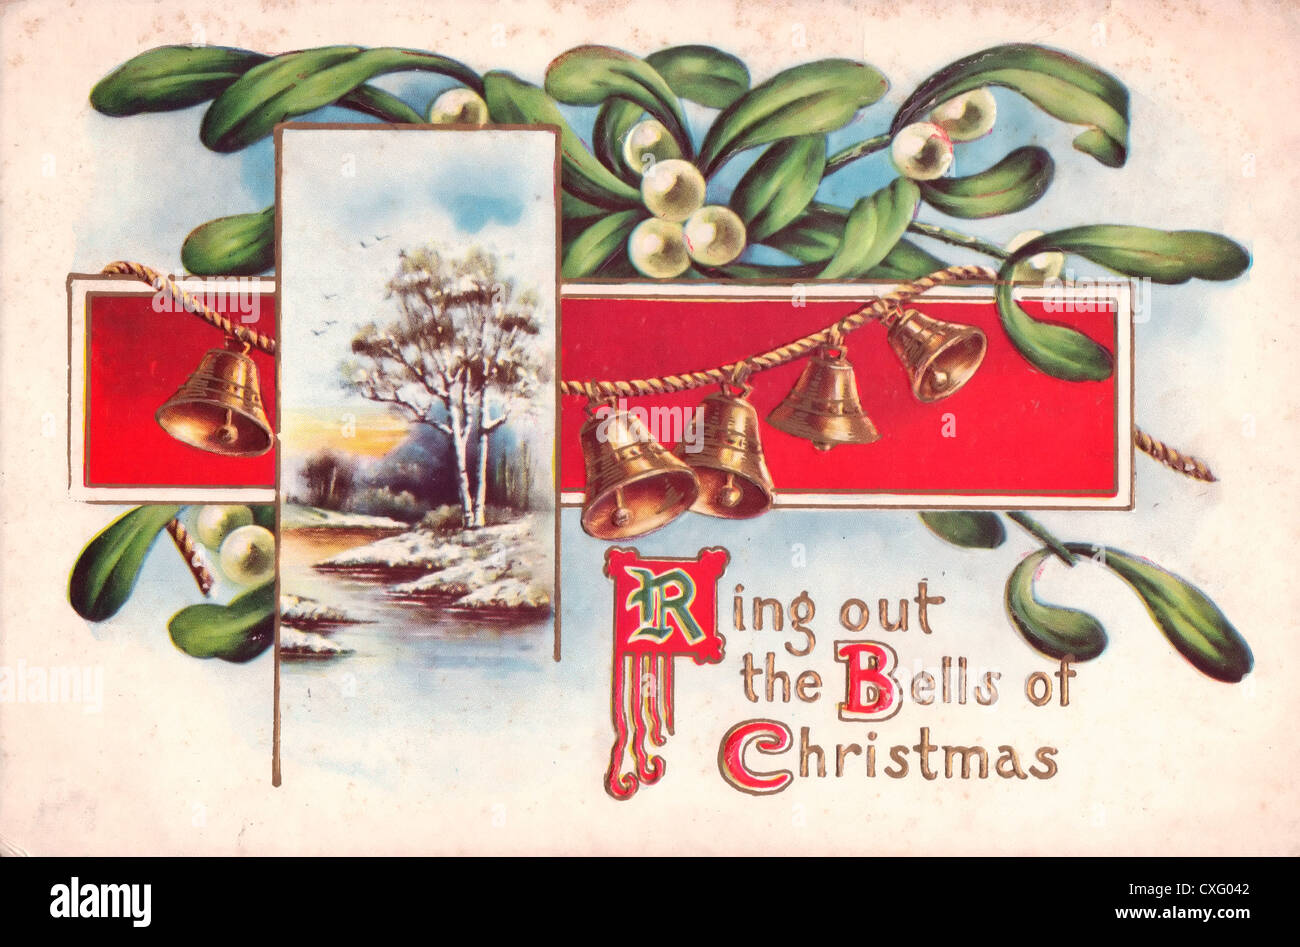 ring out the bells for christmas vintage holiday card CXG042